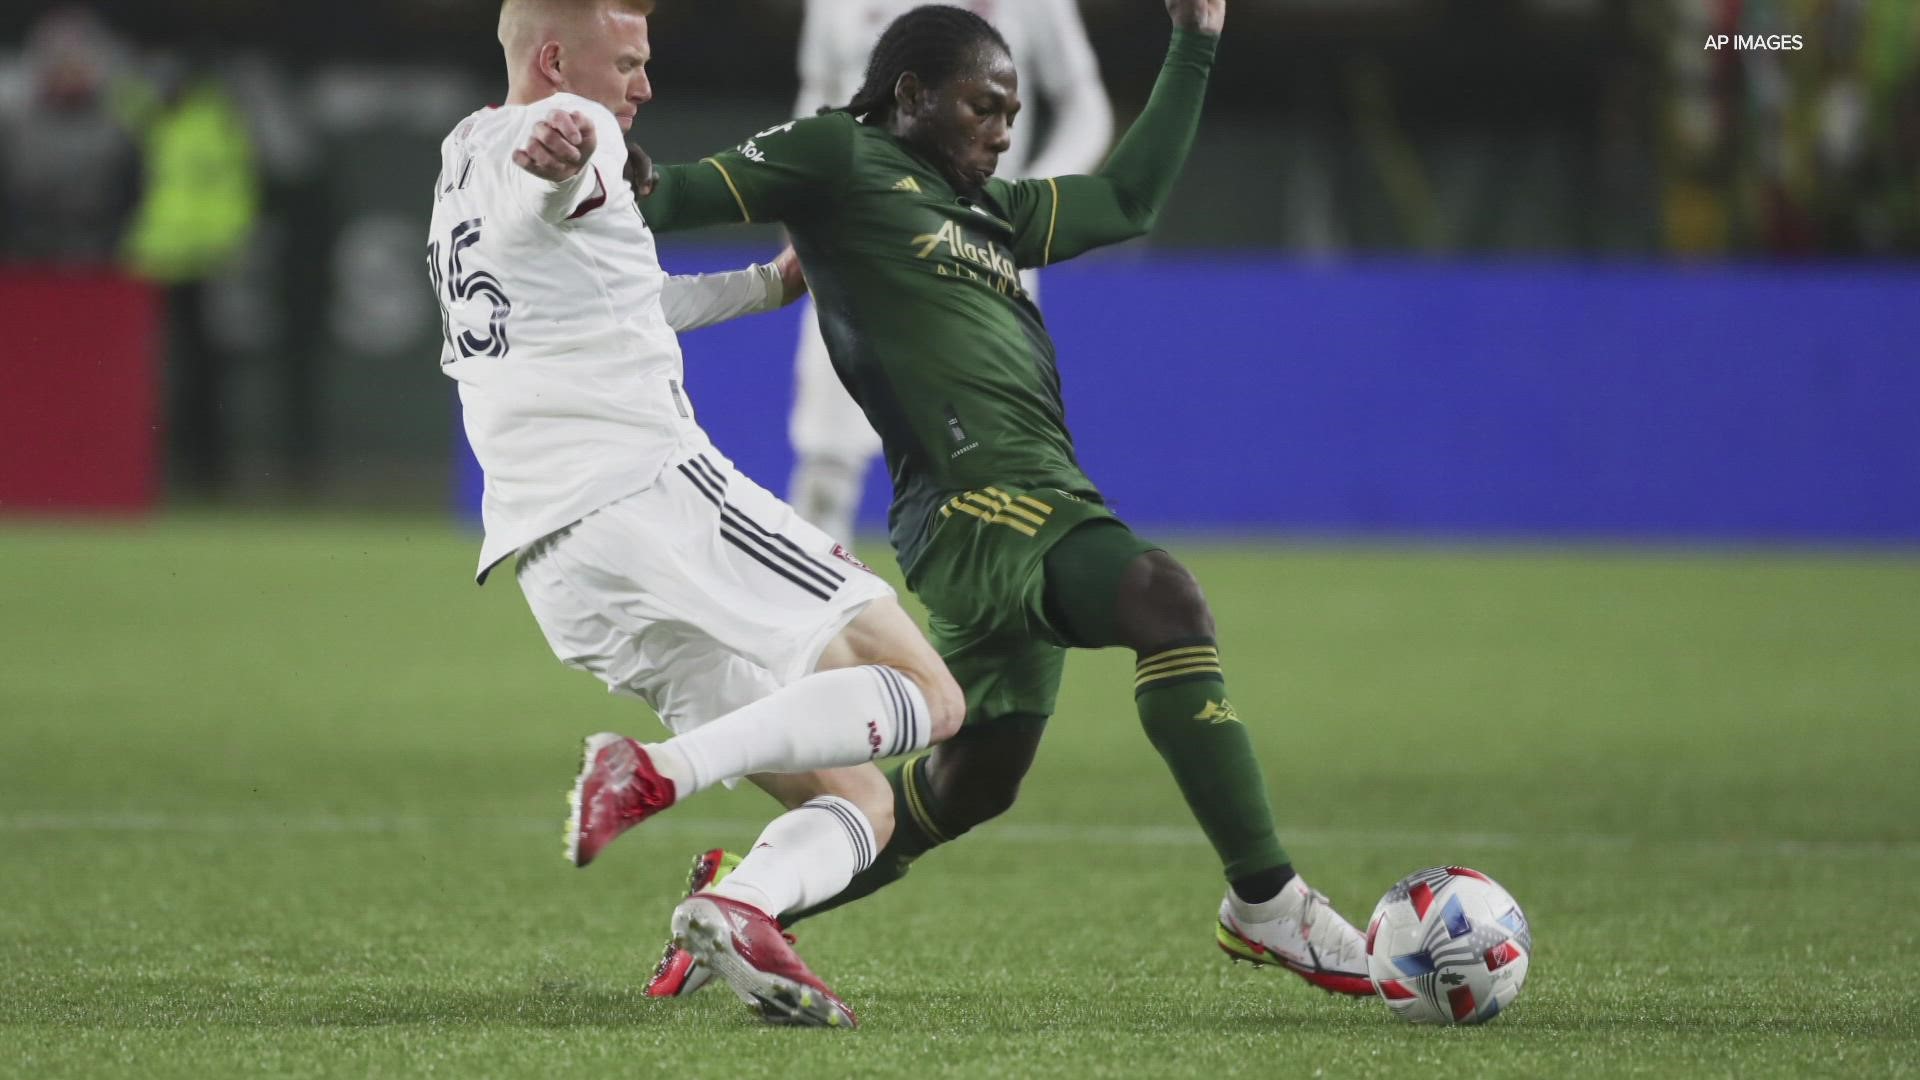 The Timbers host the MLS Cup Final in Portland on Dec. 11 against New York City FC.